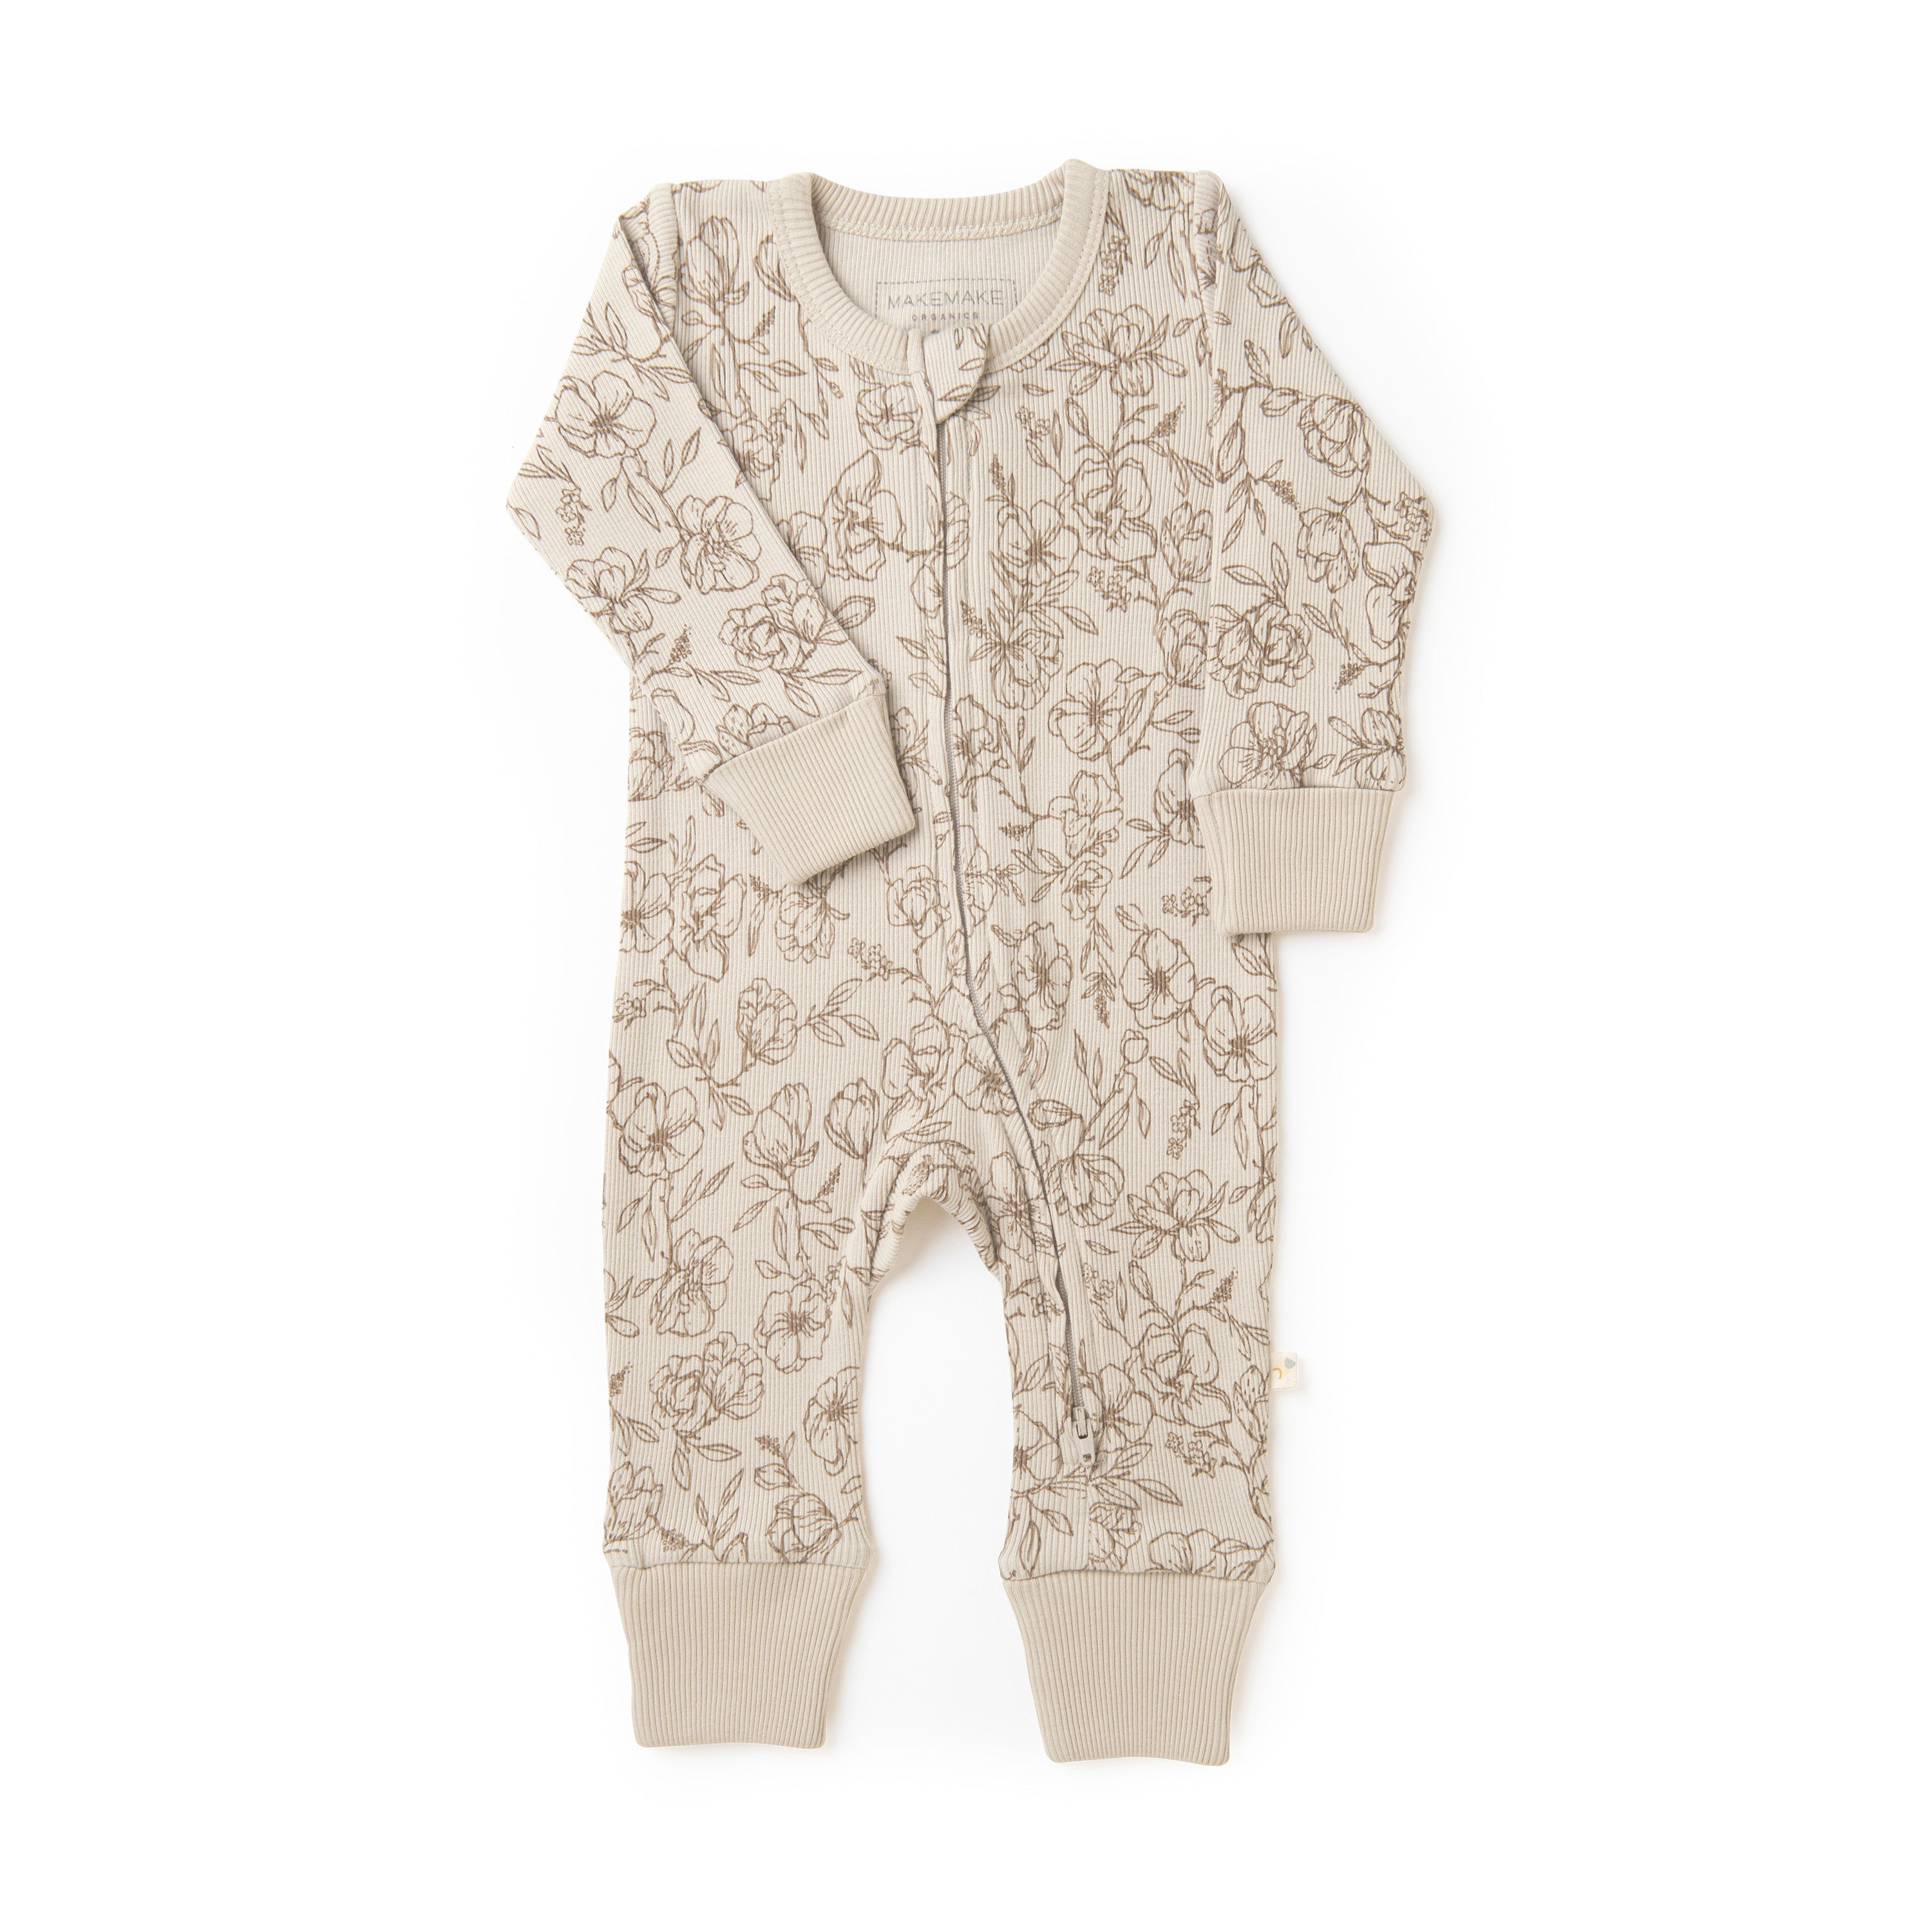 A beige Organic 2-Way Zip Romper - Vintage Bloom with a floral pattern, featuring a button front and ribbed cuffs, displayed on a white background from Organic Baby.